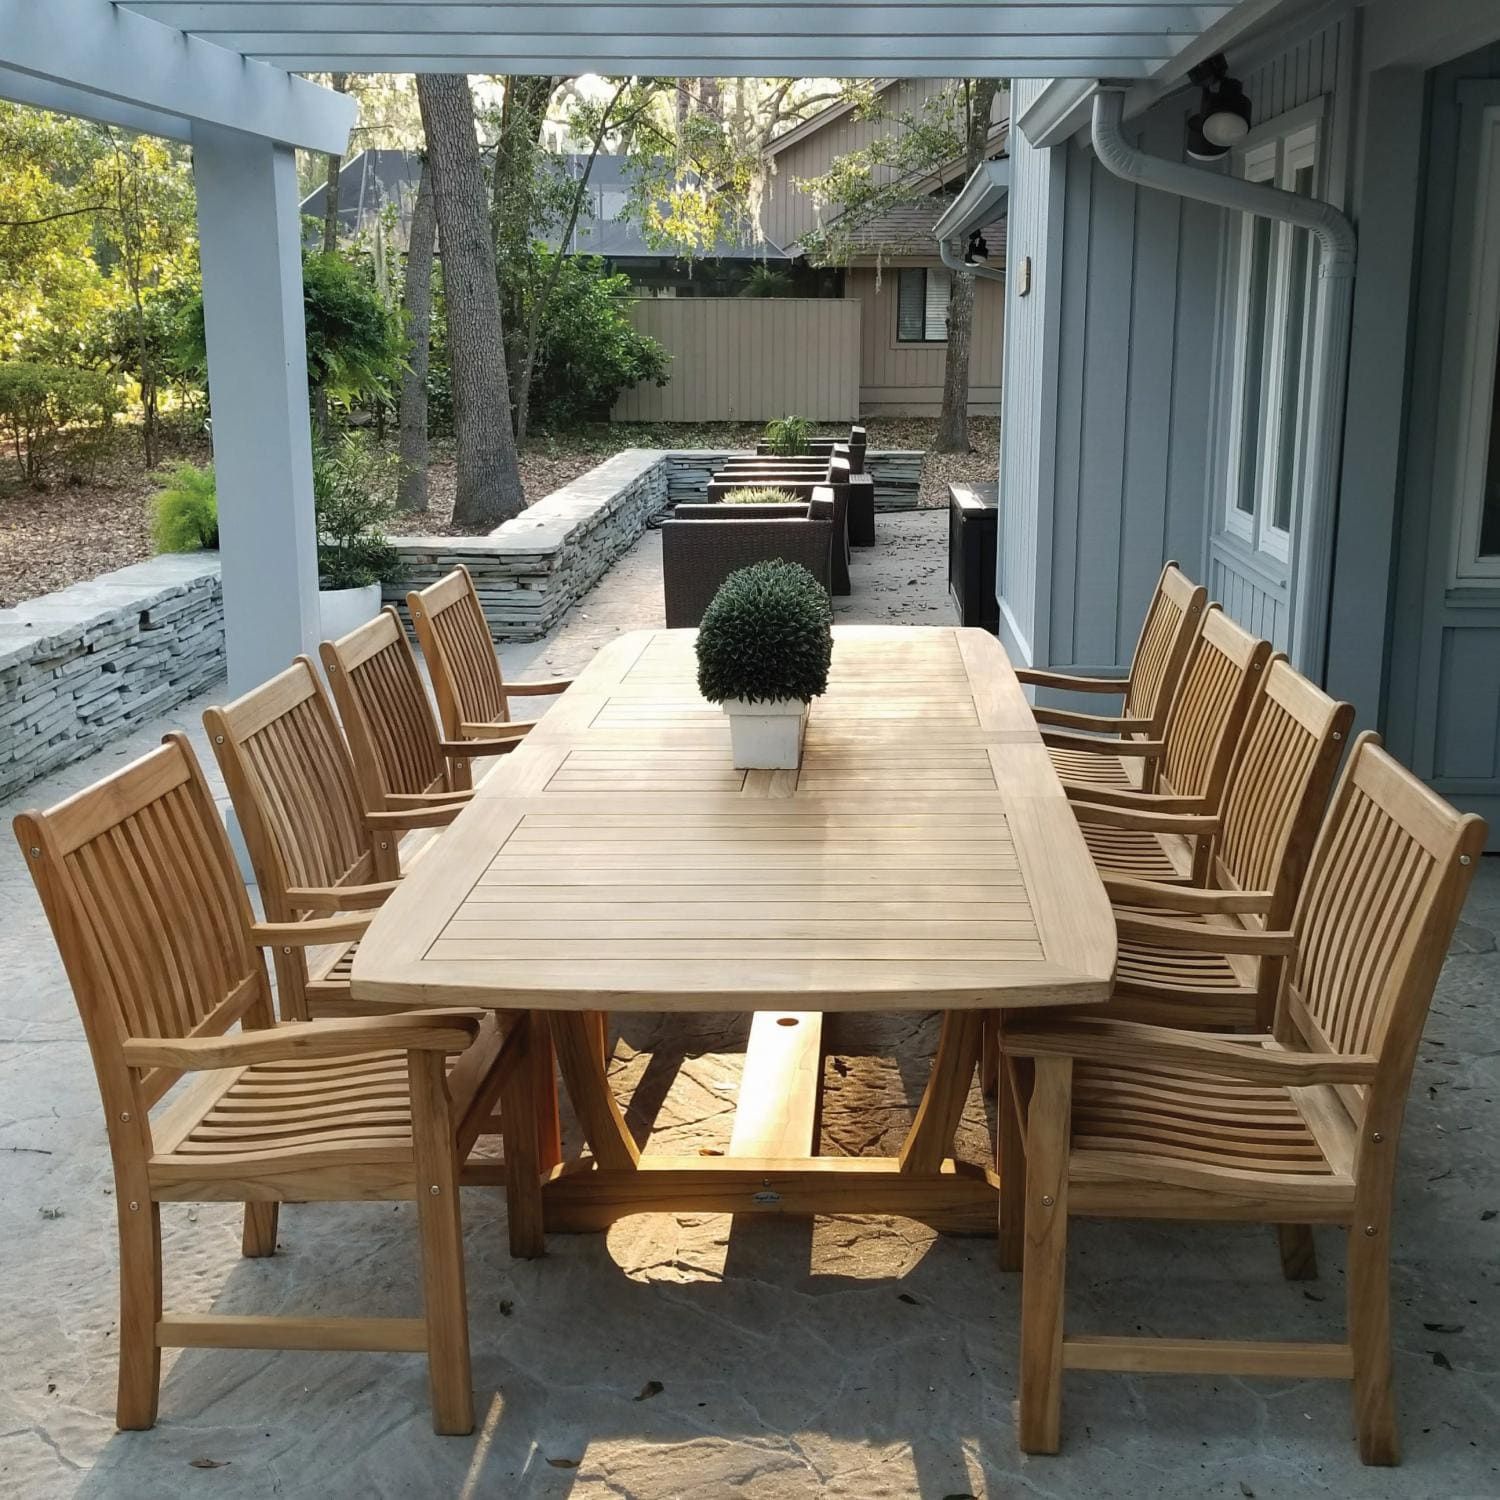 Compass 9 Piece Teak Patio Dining Set W/ 84 X 43 Inch Rectangular With Regard To 9 Piece Patio Dining Sets (View 11 of 15)